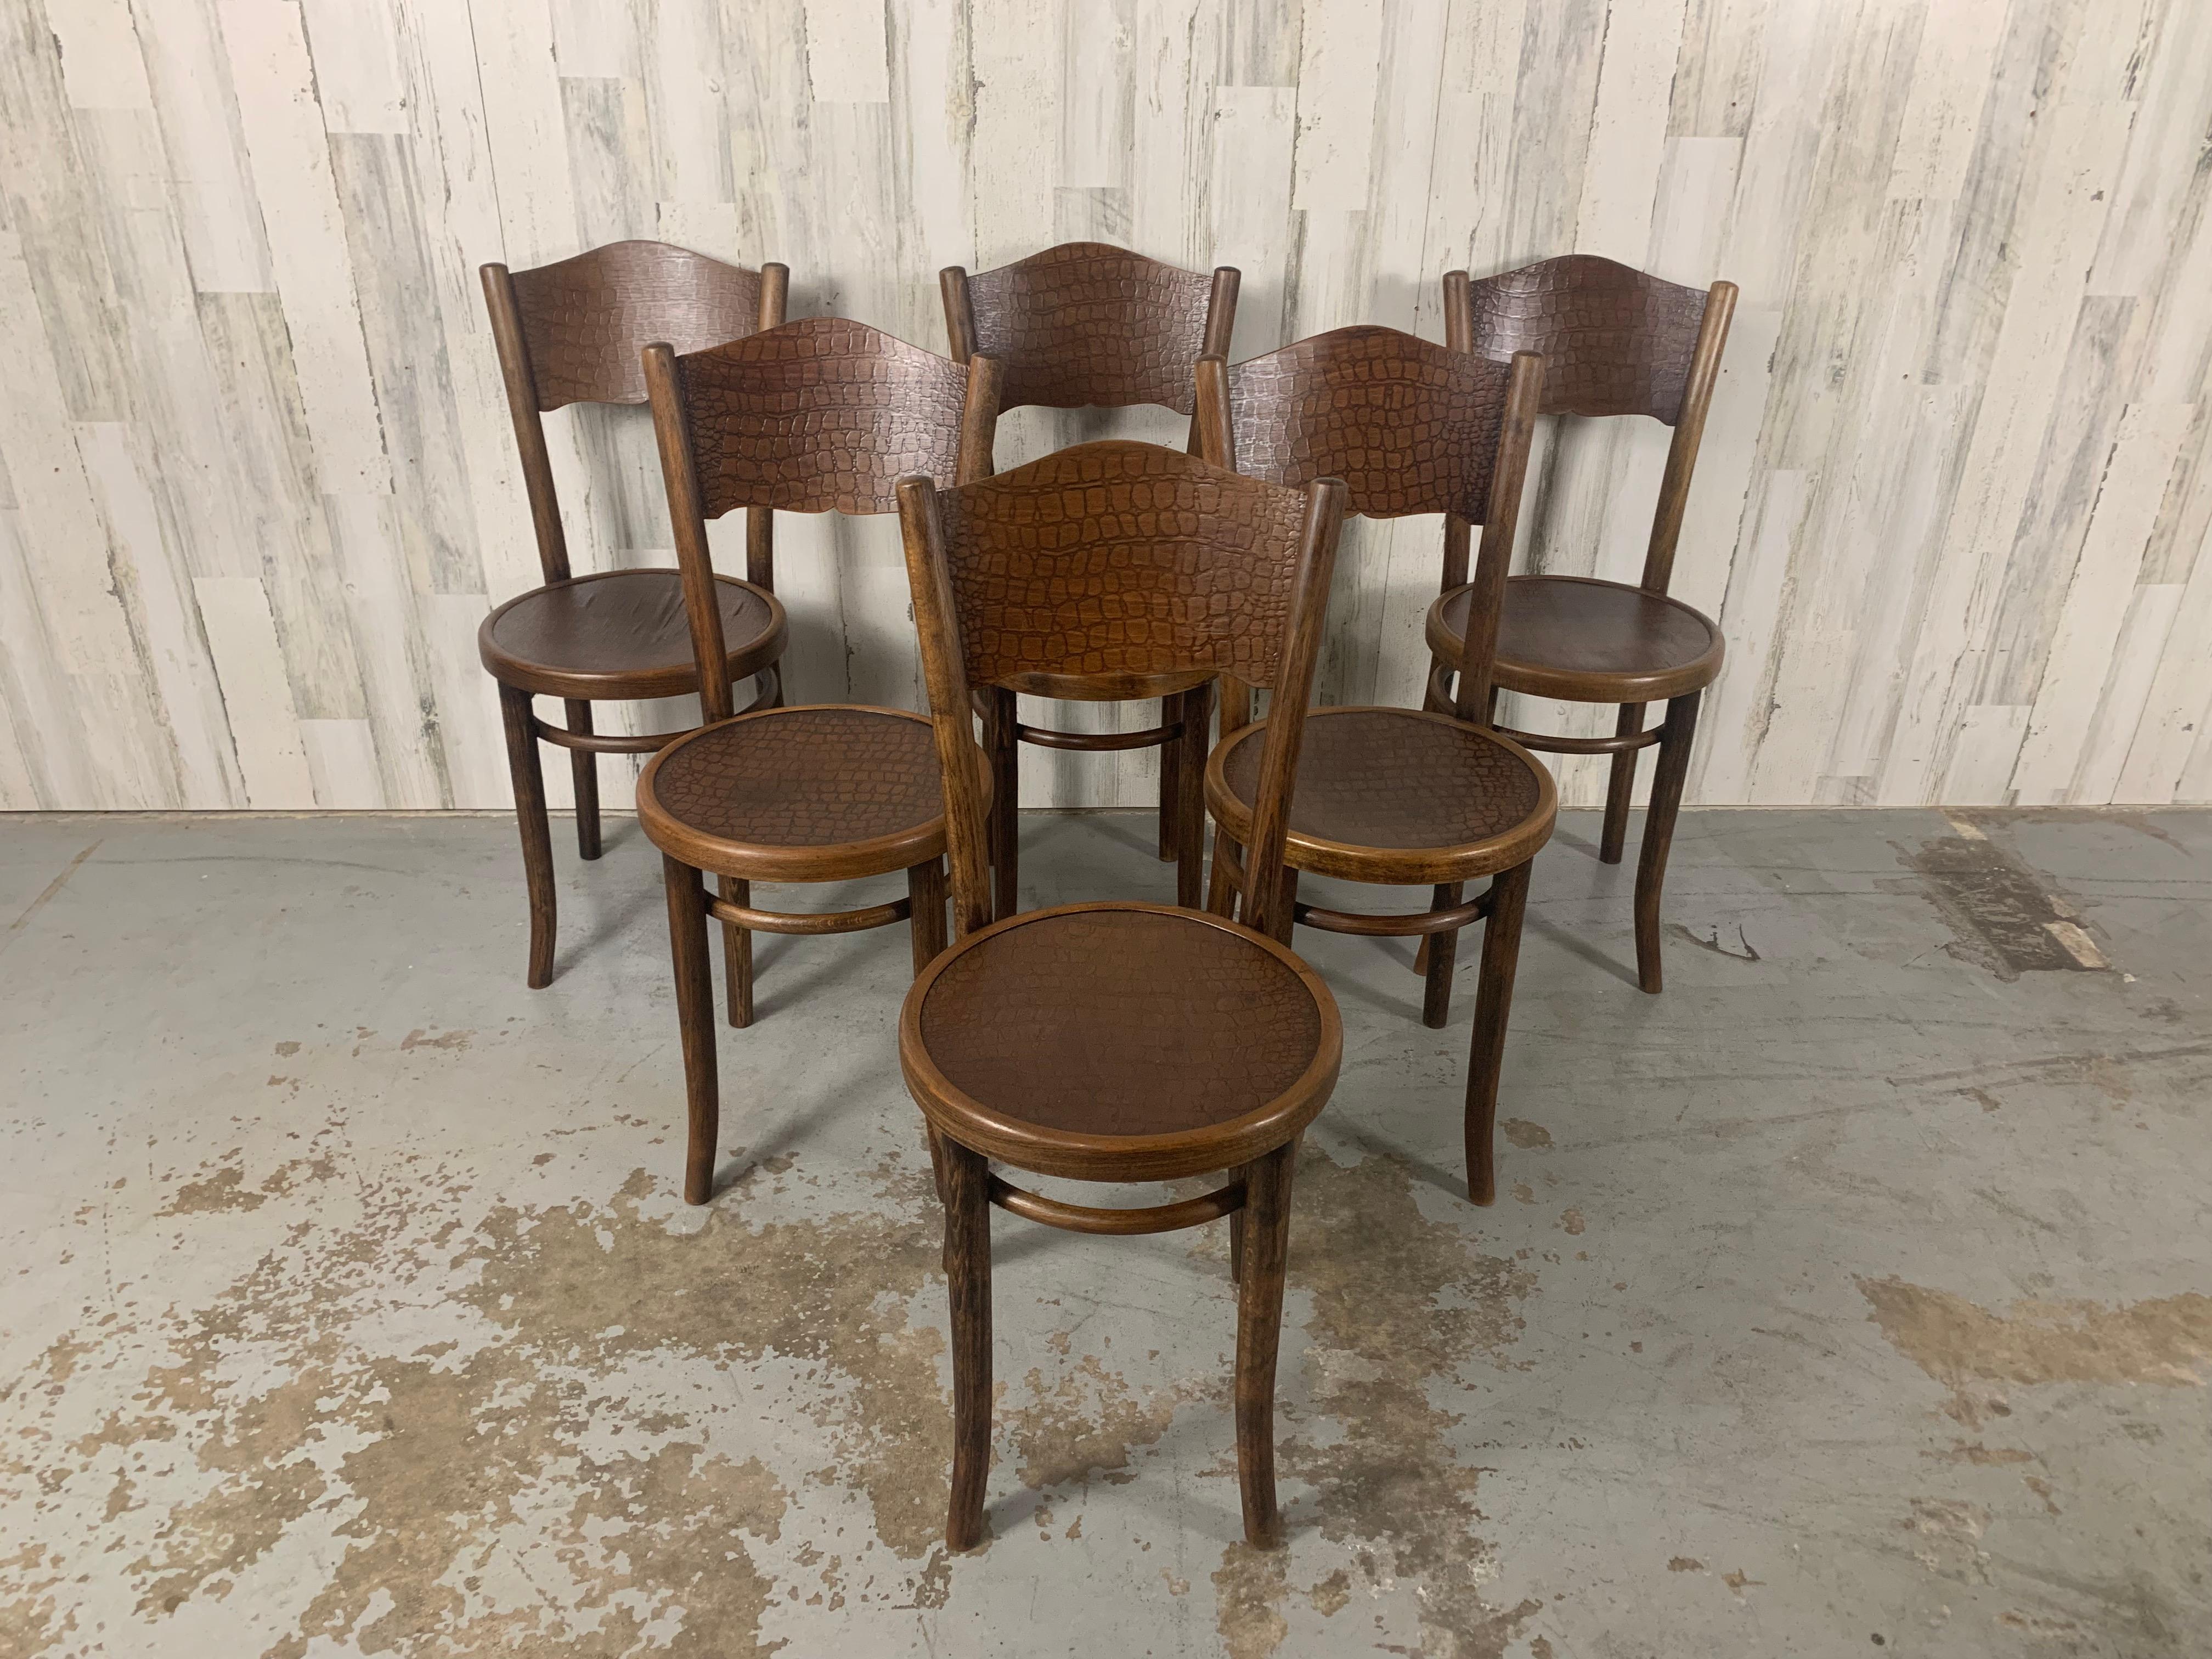 Bentwood Thonet bistro chairs model 255. hard to come by set of six with the embossed Crocodile pattern. The curved back makes these more comfortable than flat back chairs. Made in Poland with paper labels on some of the chairs.